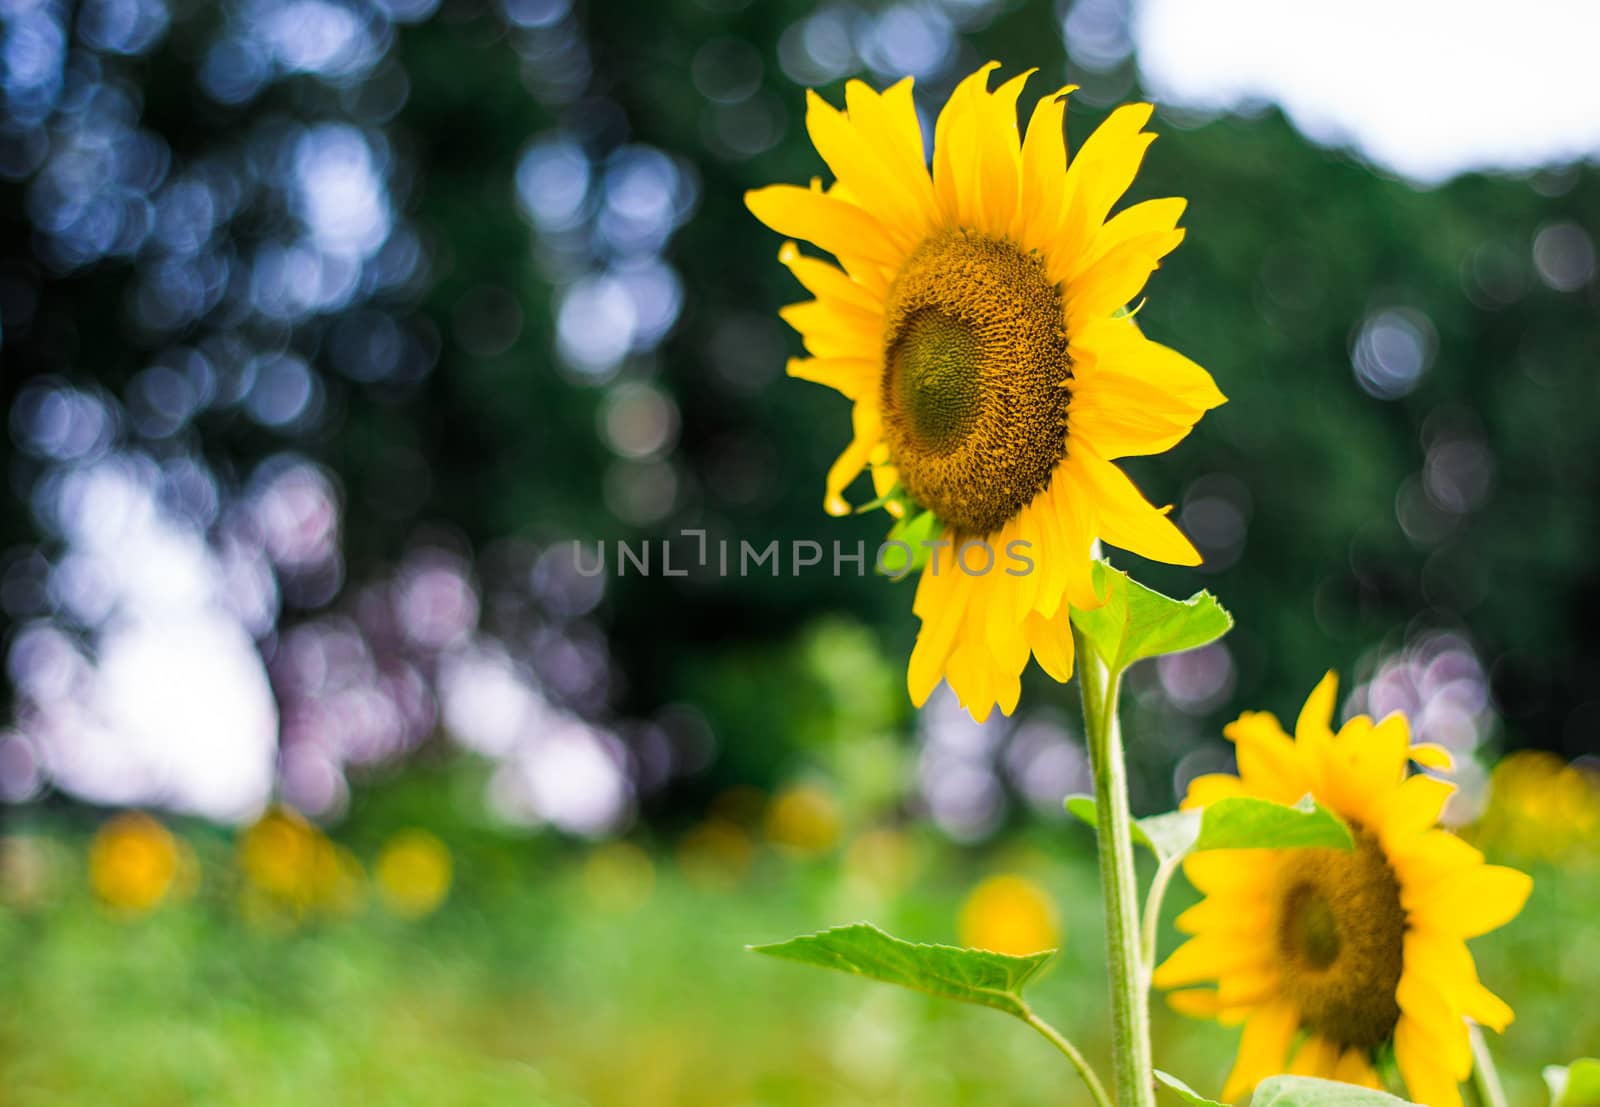 Sunflowers on a blur background